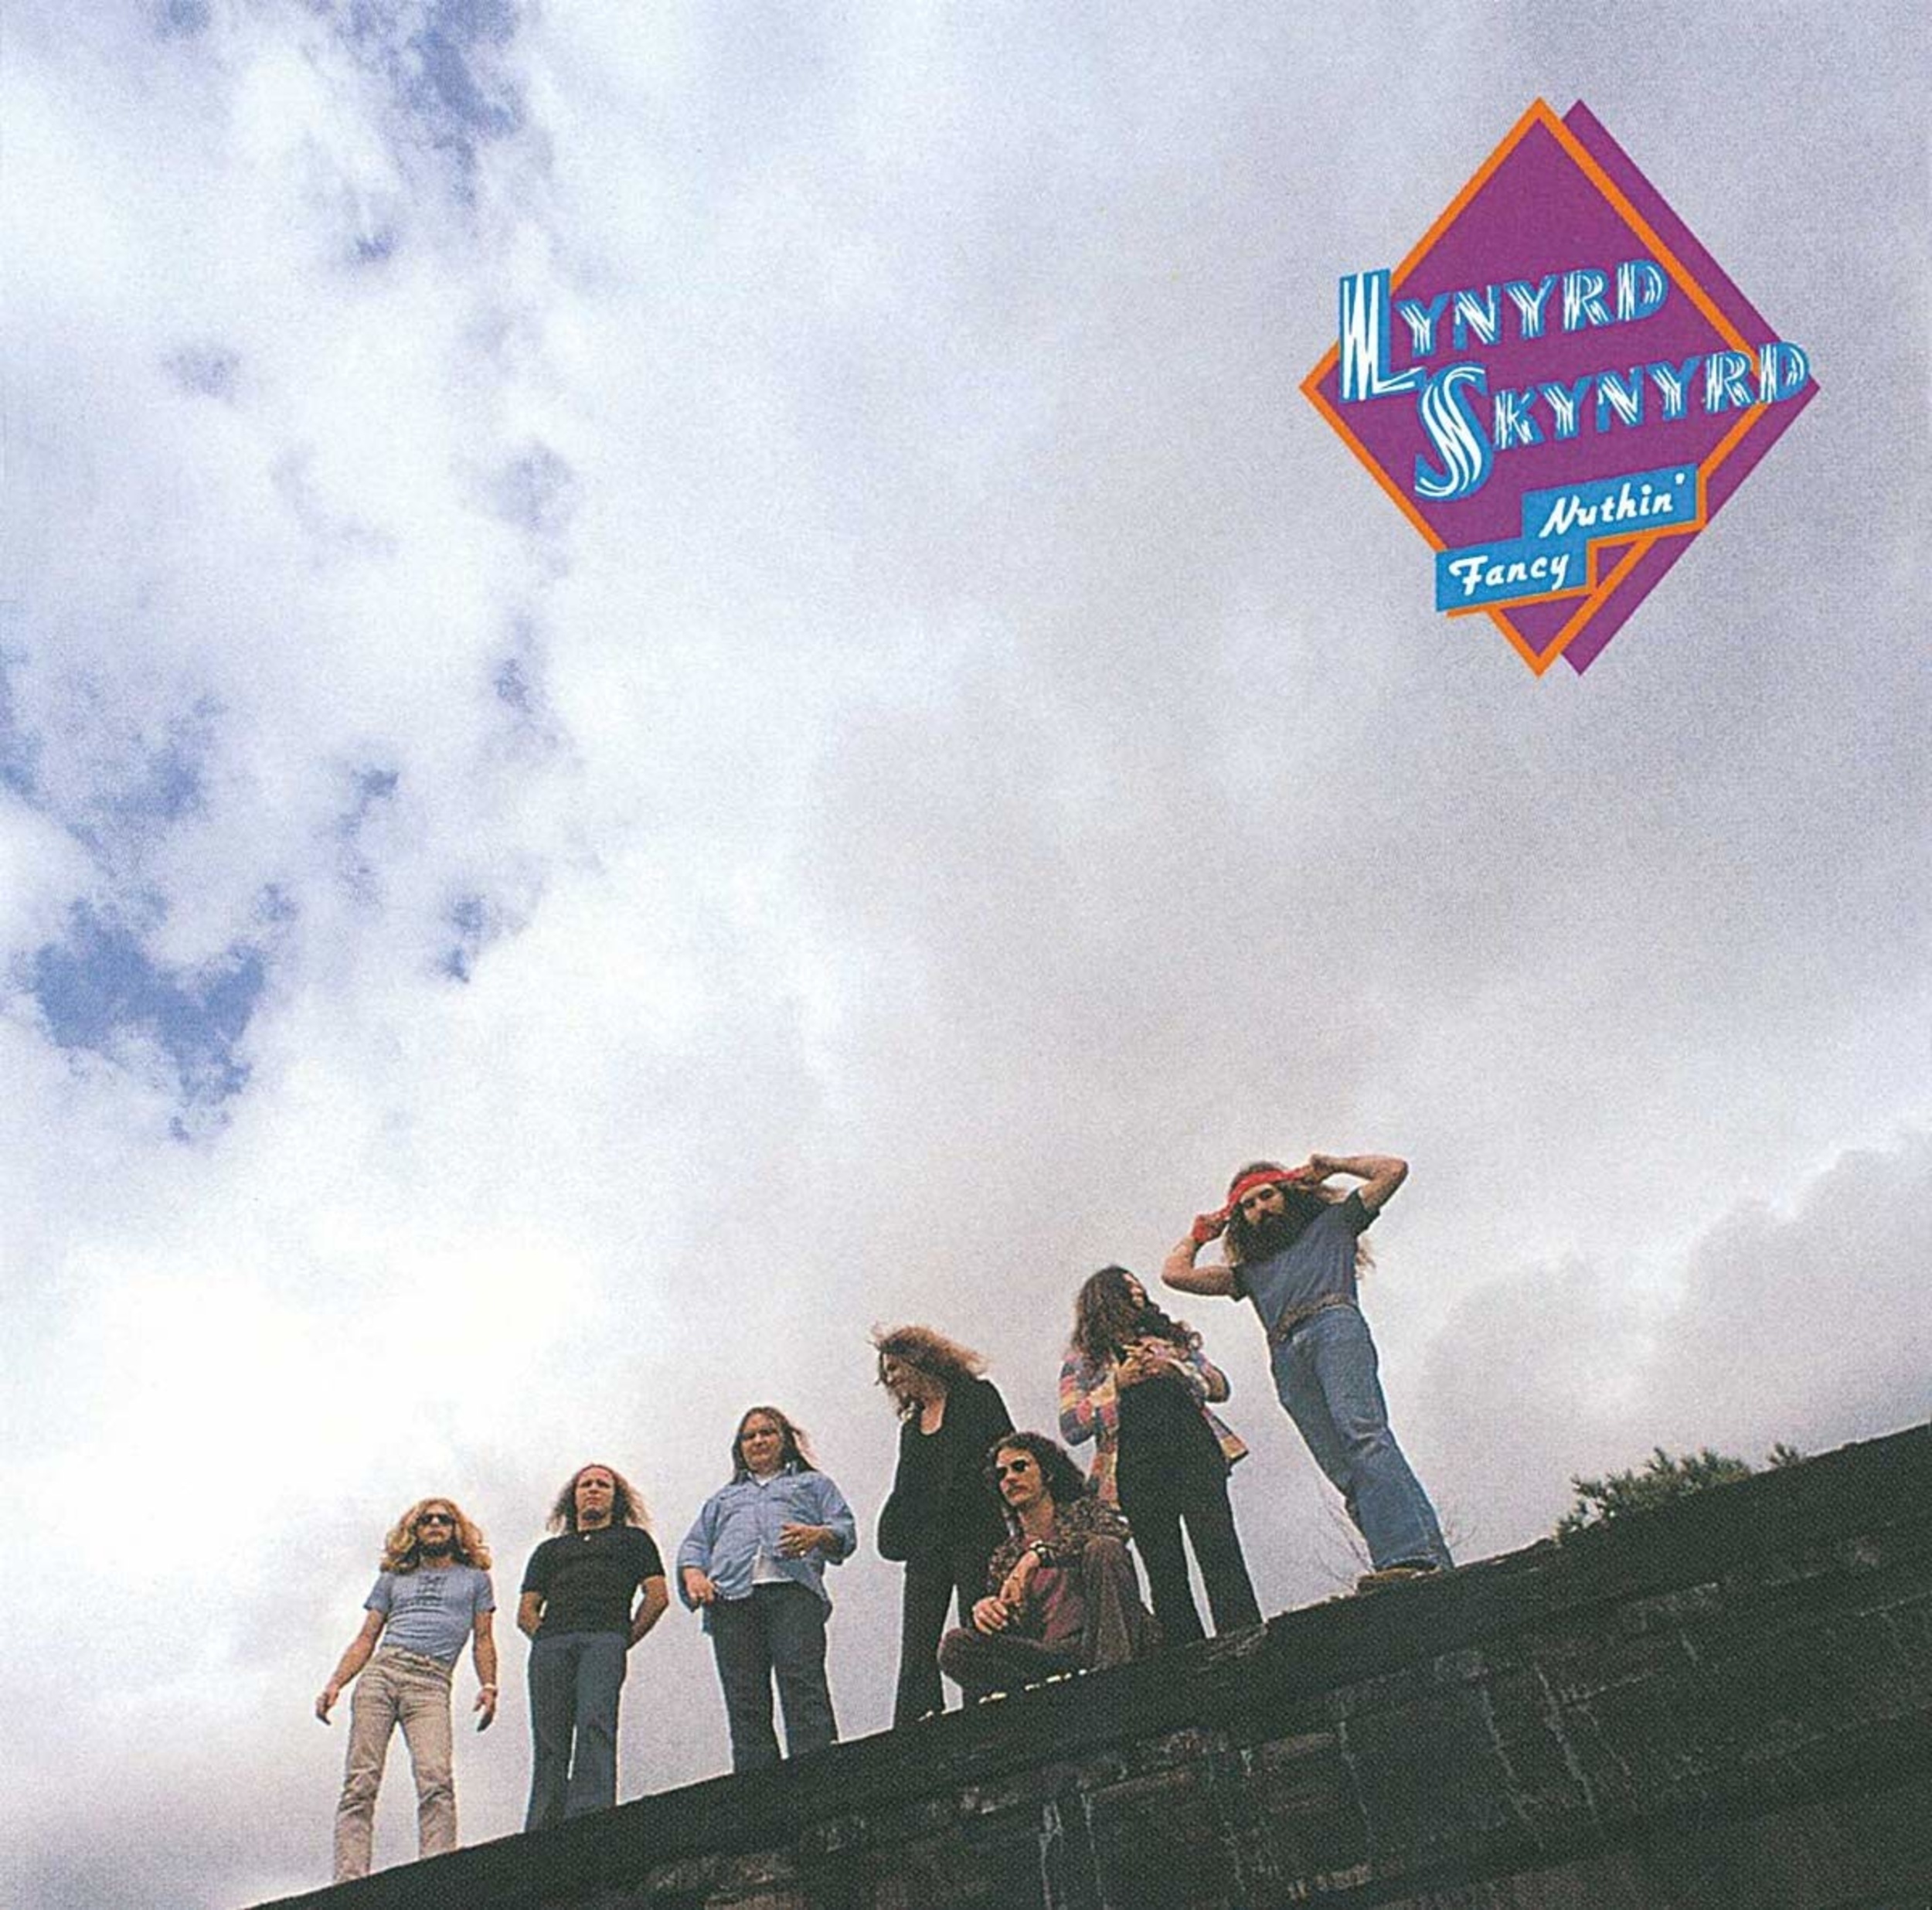 <p>The early, classic Skynyrd lineup was comprised of self-proclaimed "rednecks." Yet, Ronnie Van Zant, and presumably others in the band, were proponents of gun control, which is the theme of the song. One of the band's most recognizable tunes, "<a href="https://www.youtube.com/watch?v=RXQc7MJBg4o">Saturday Night Special</a>," the opening track from <em>Nuthin</em><em>' </em><em>Fancy, </em>reached No. 27 on <em>Billboard'</em>s Hot 100.</p><p>You may also like: <a href='https://www.yardbarker.com/entertainment/articles/anti_hero_the_ultimate_taylor_swift_playlist_013124/s1__30786248'>Anti-Hero: The ultimate Taylor Swift playlist</a></p>